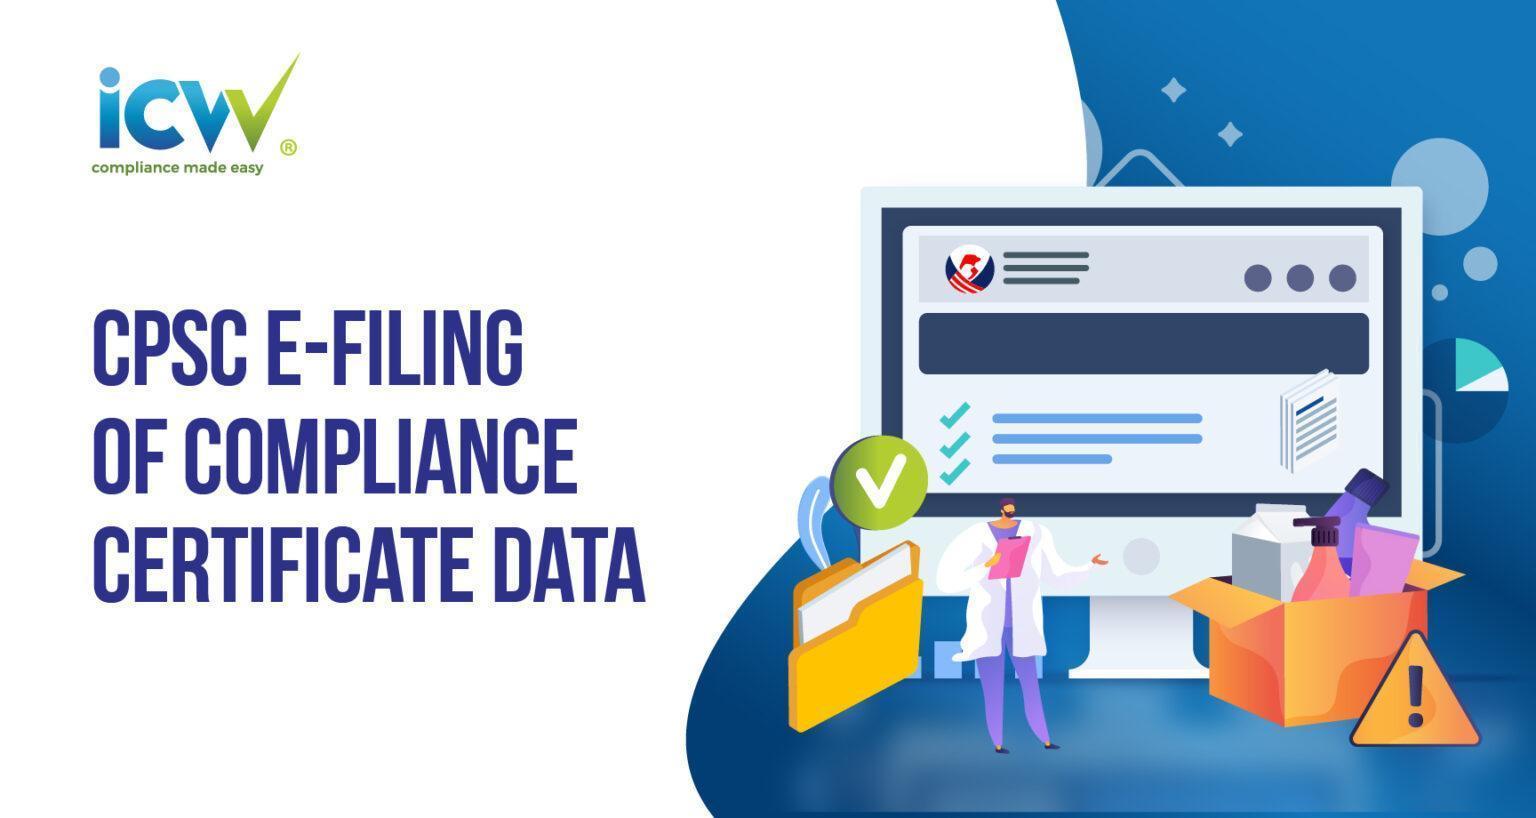 CPSC Electronic Filing (eFiling) of Compliance Certificate Data